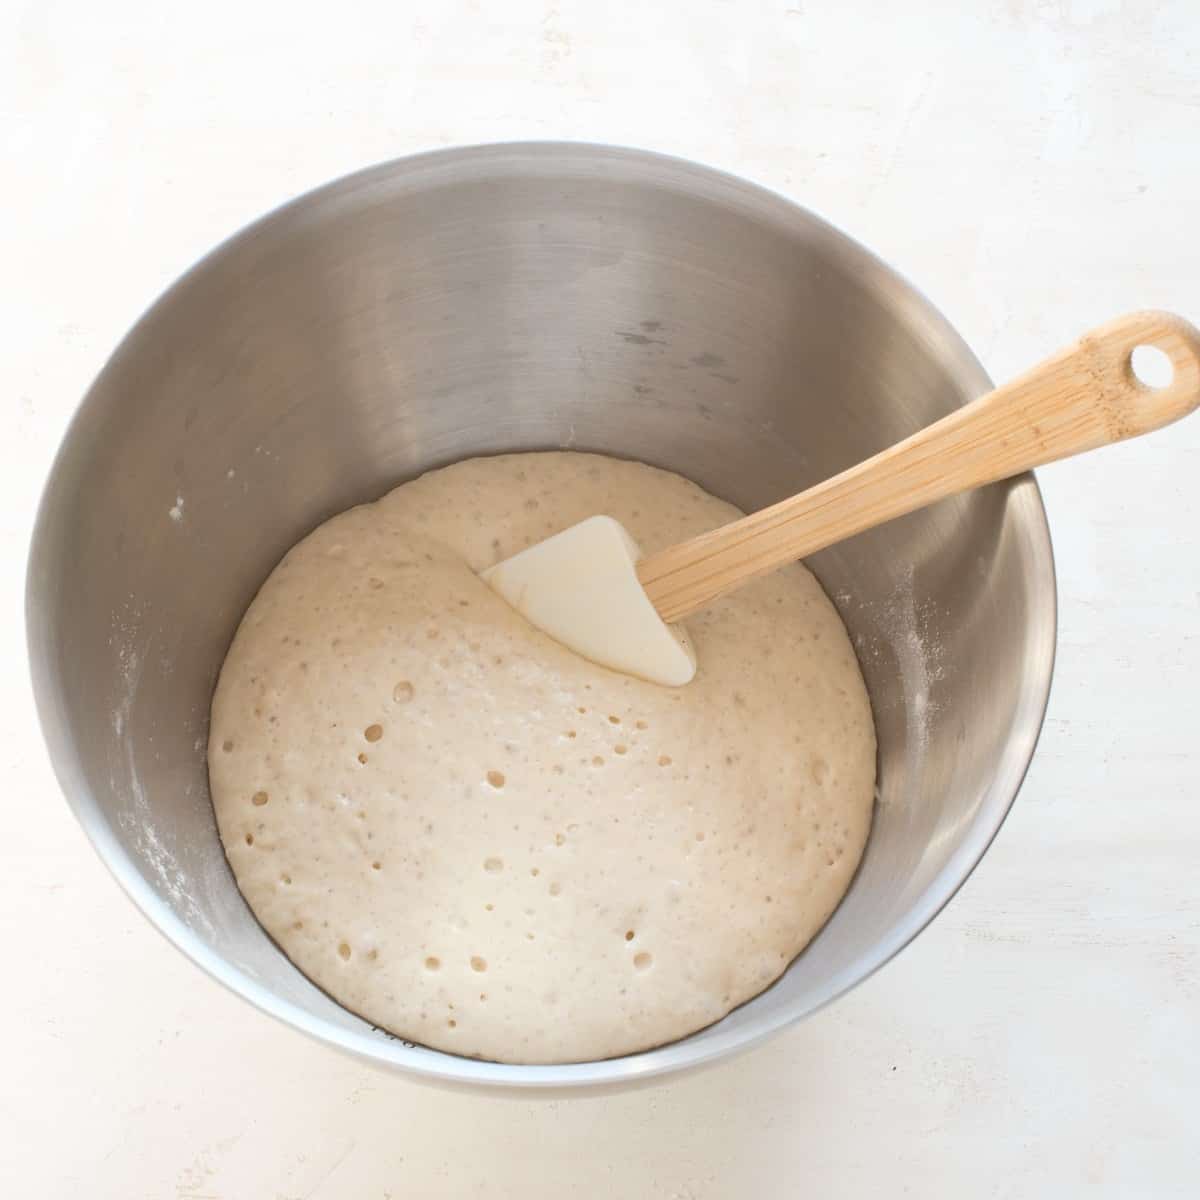 Raised yeast starter in a stainless bowl.